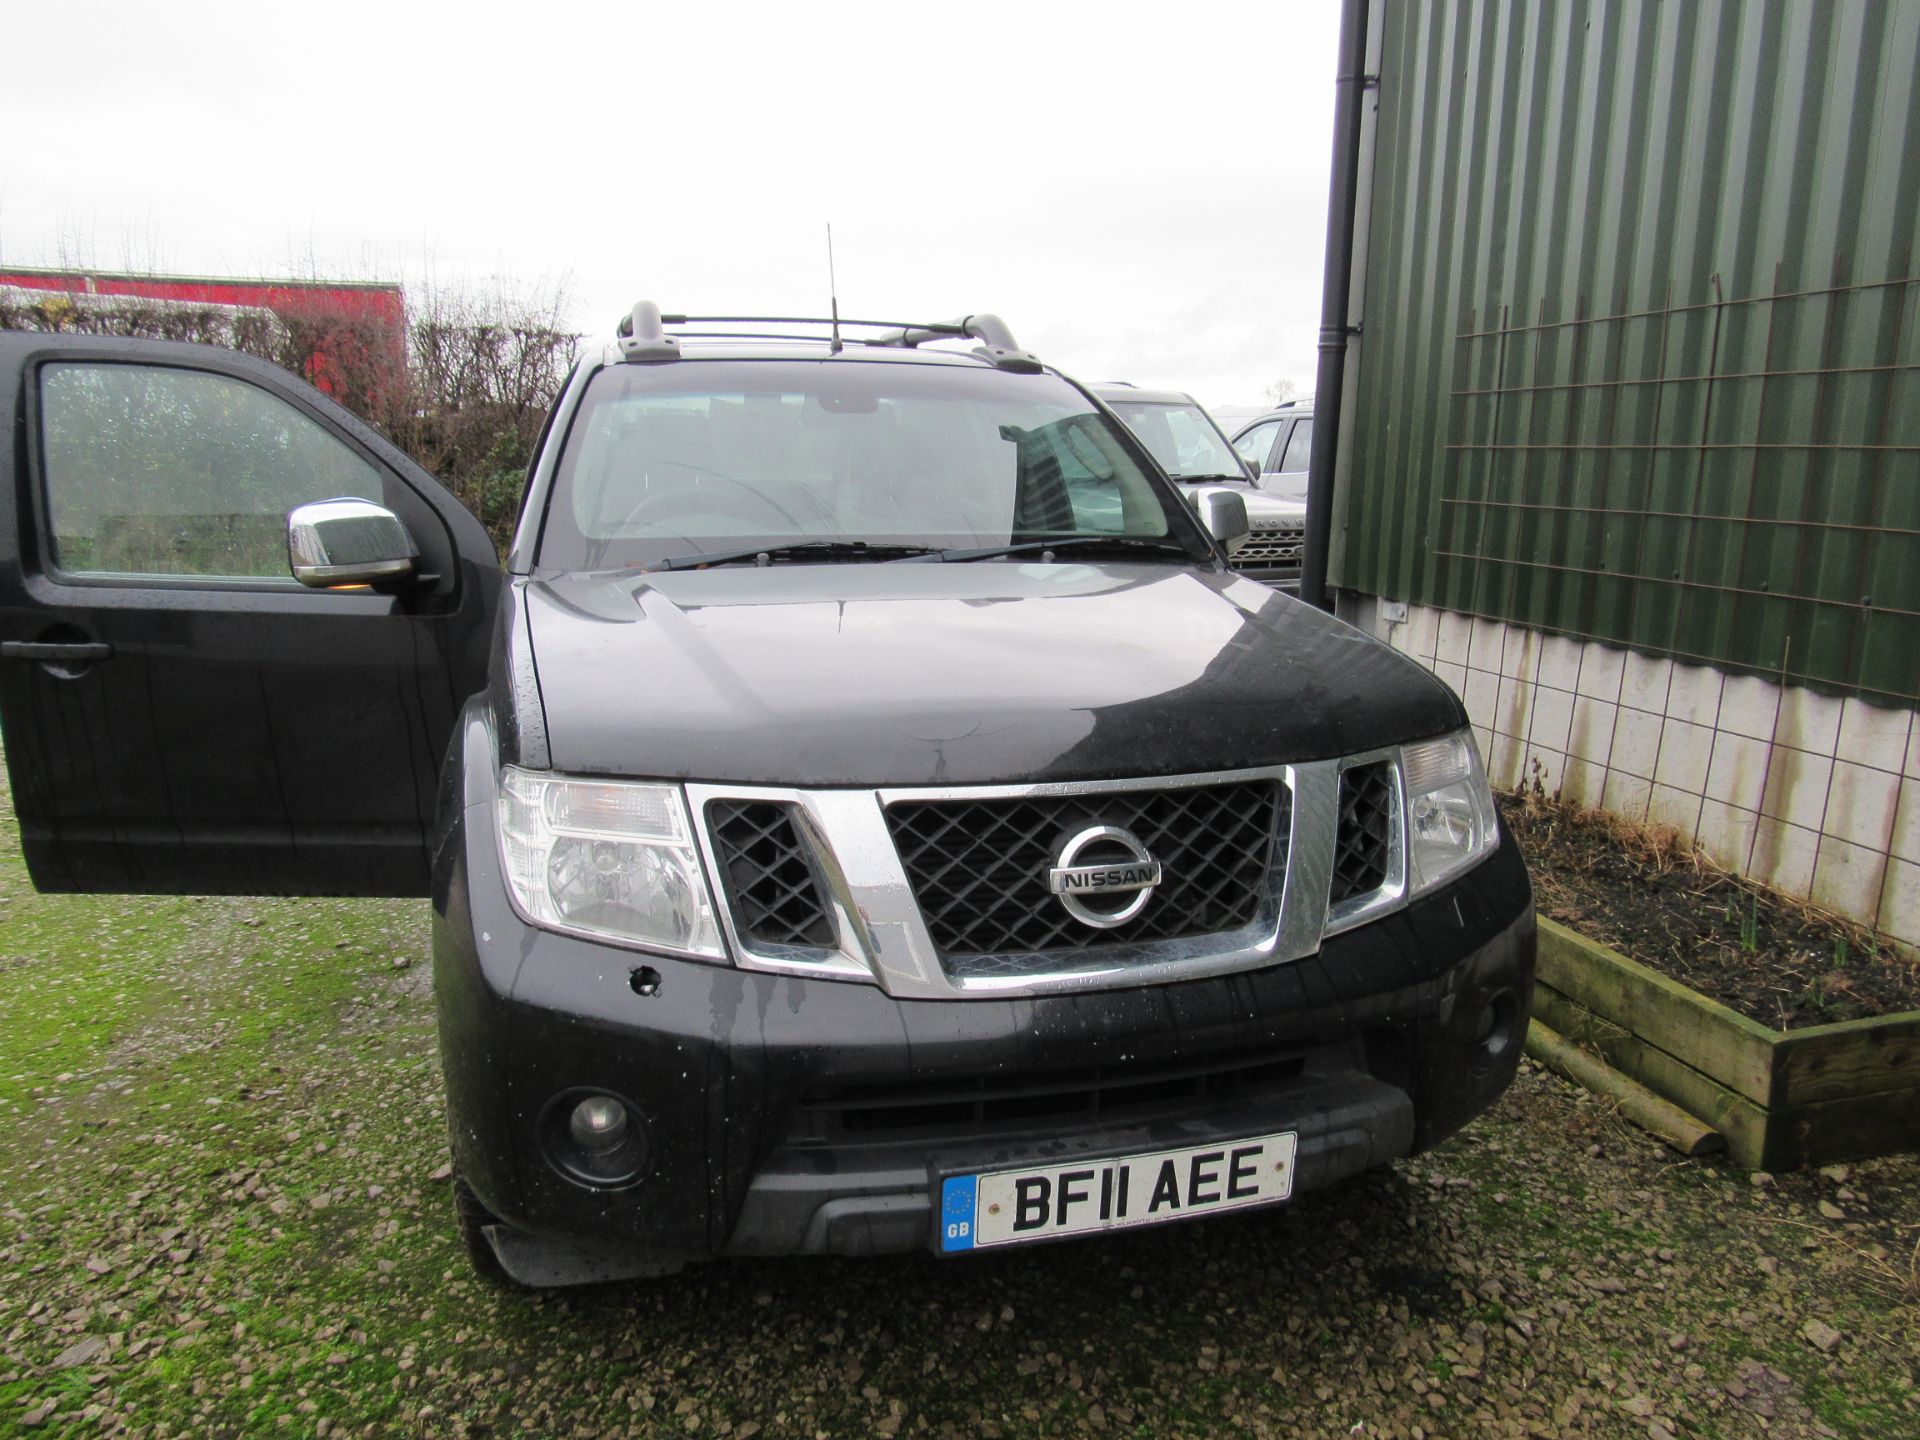 Nissan Navara Tekna 2.5DCI 4WD Auto Double Cab Pick Up, registration BF11 AEE, first registered 25 - Image 17 of 22